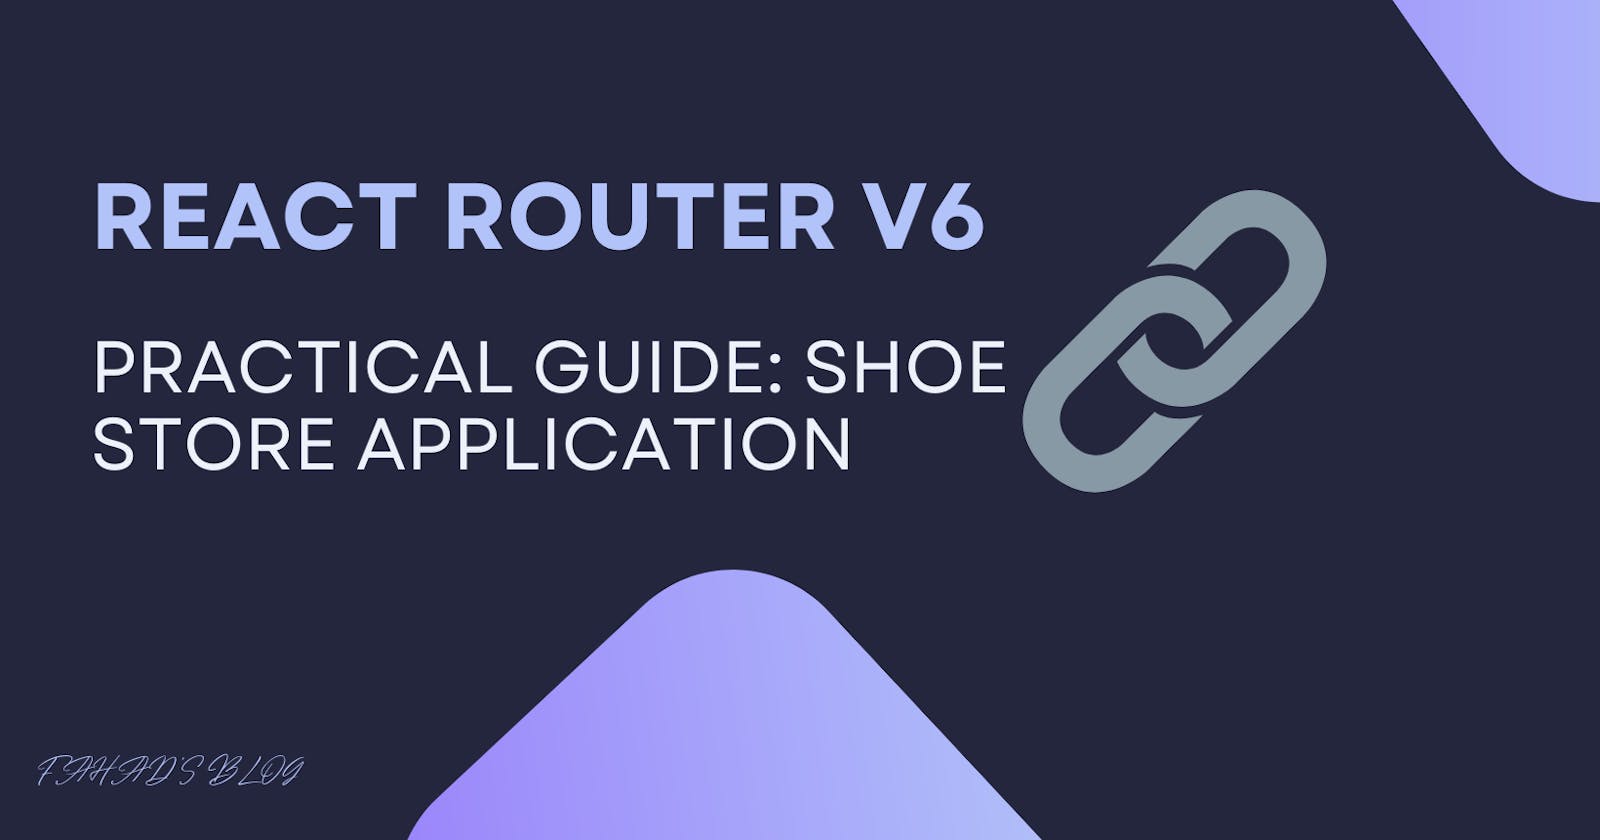 React Router V6: A Practical Guide with Shoe Store Application